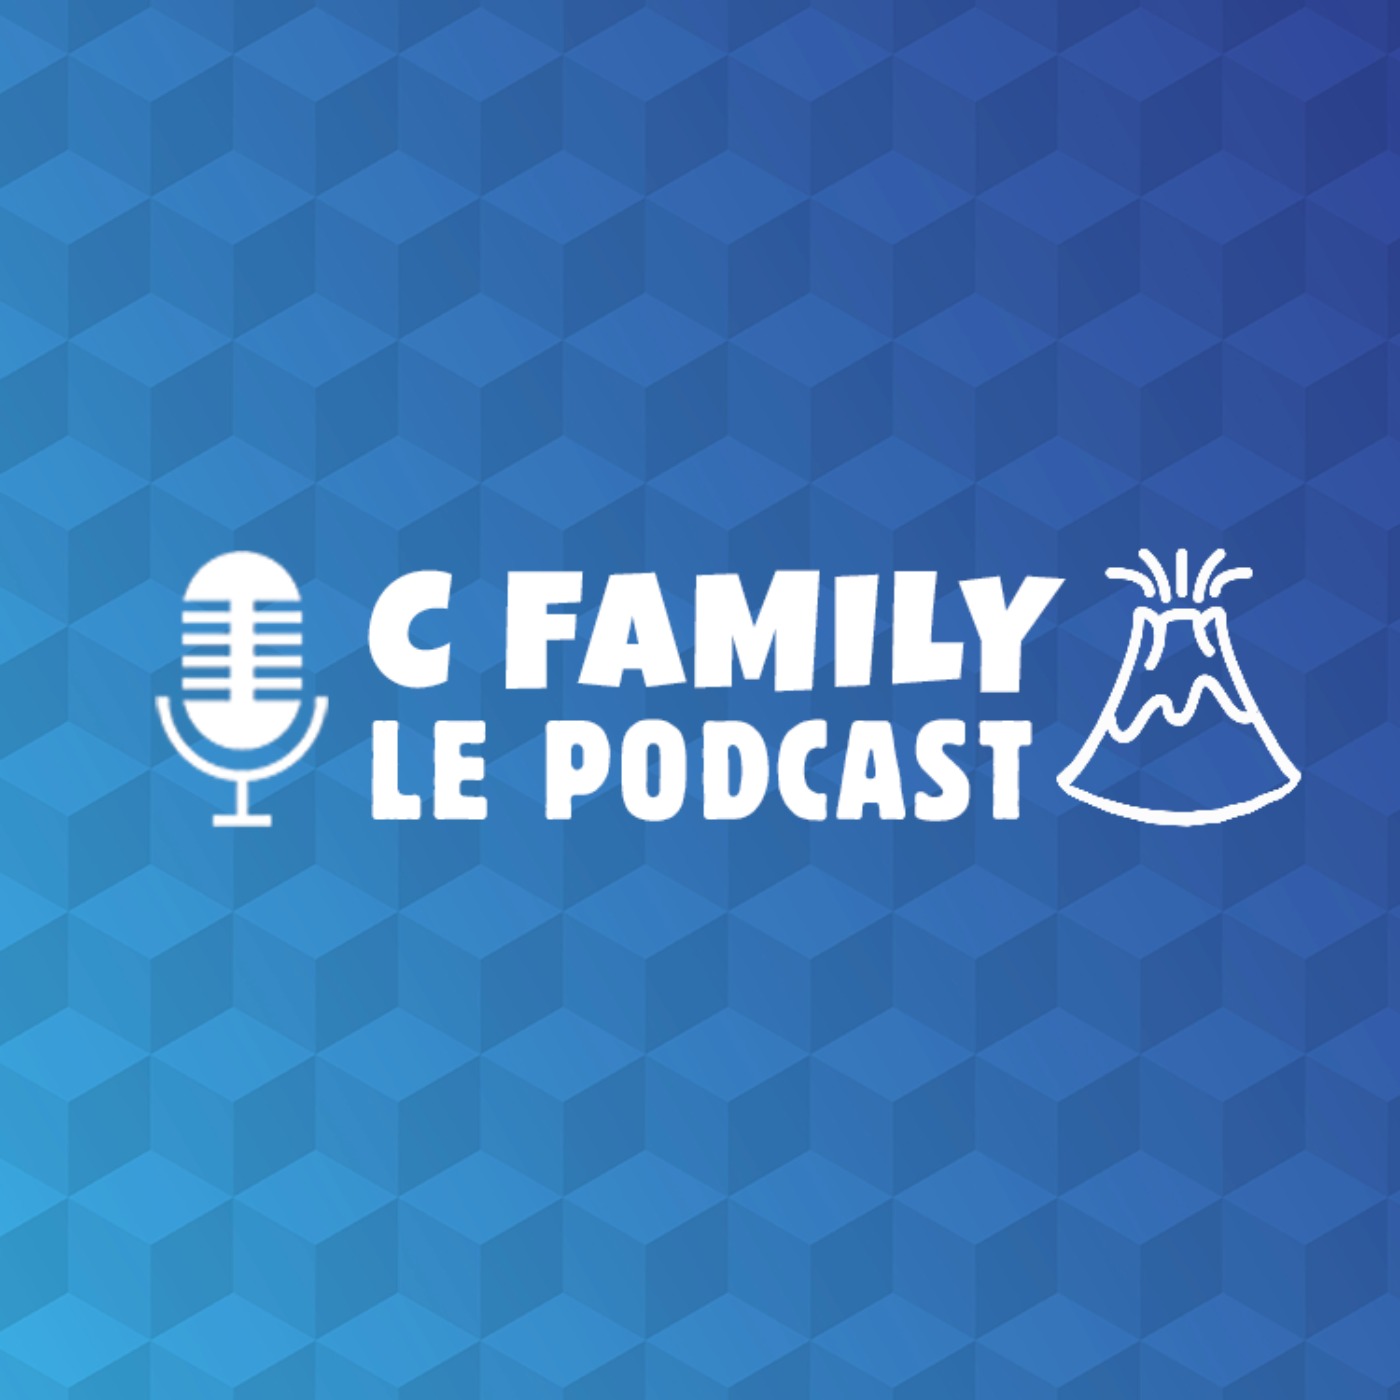 C Family Le Podcast